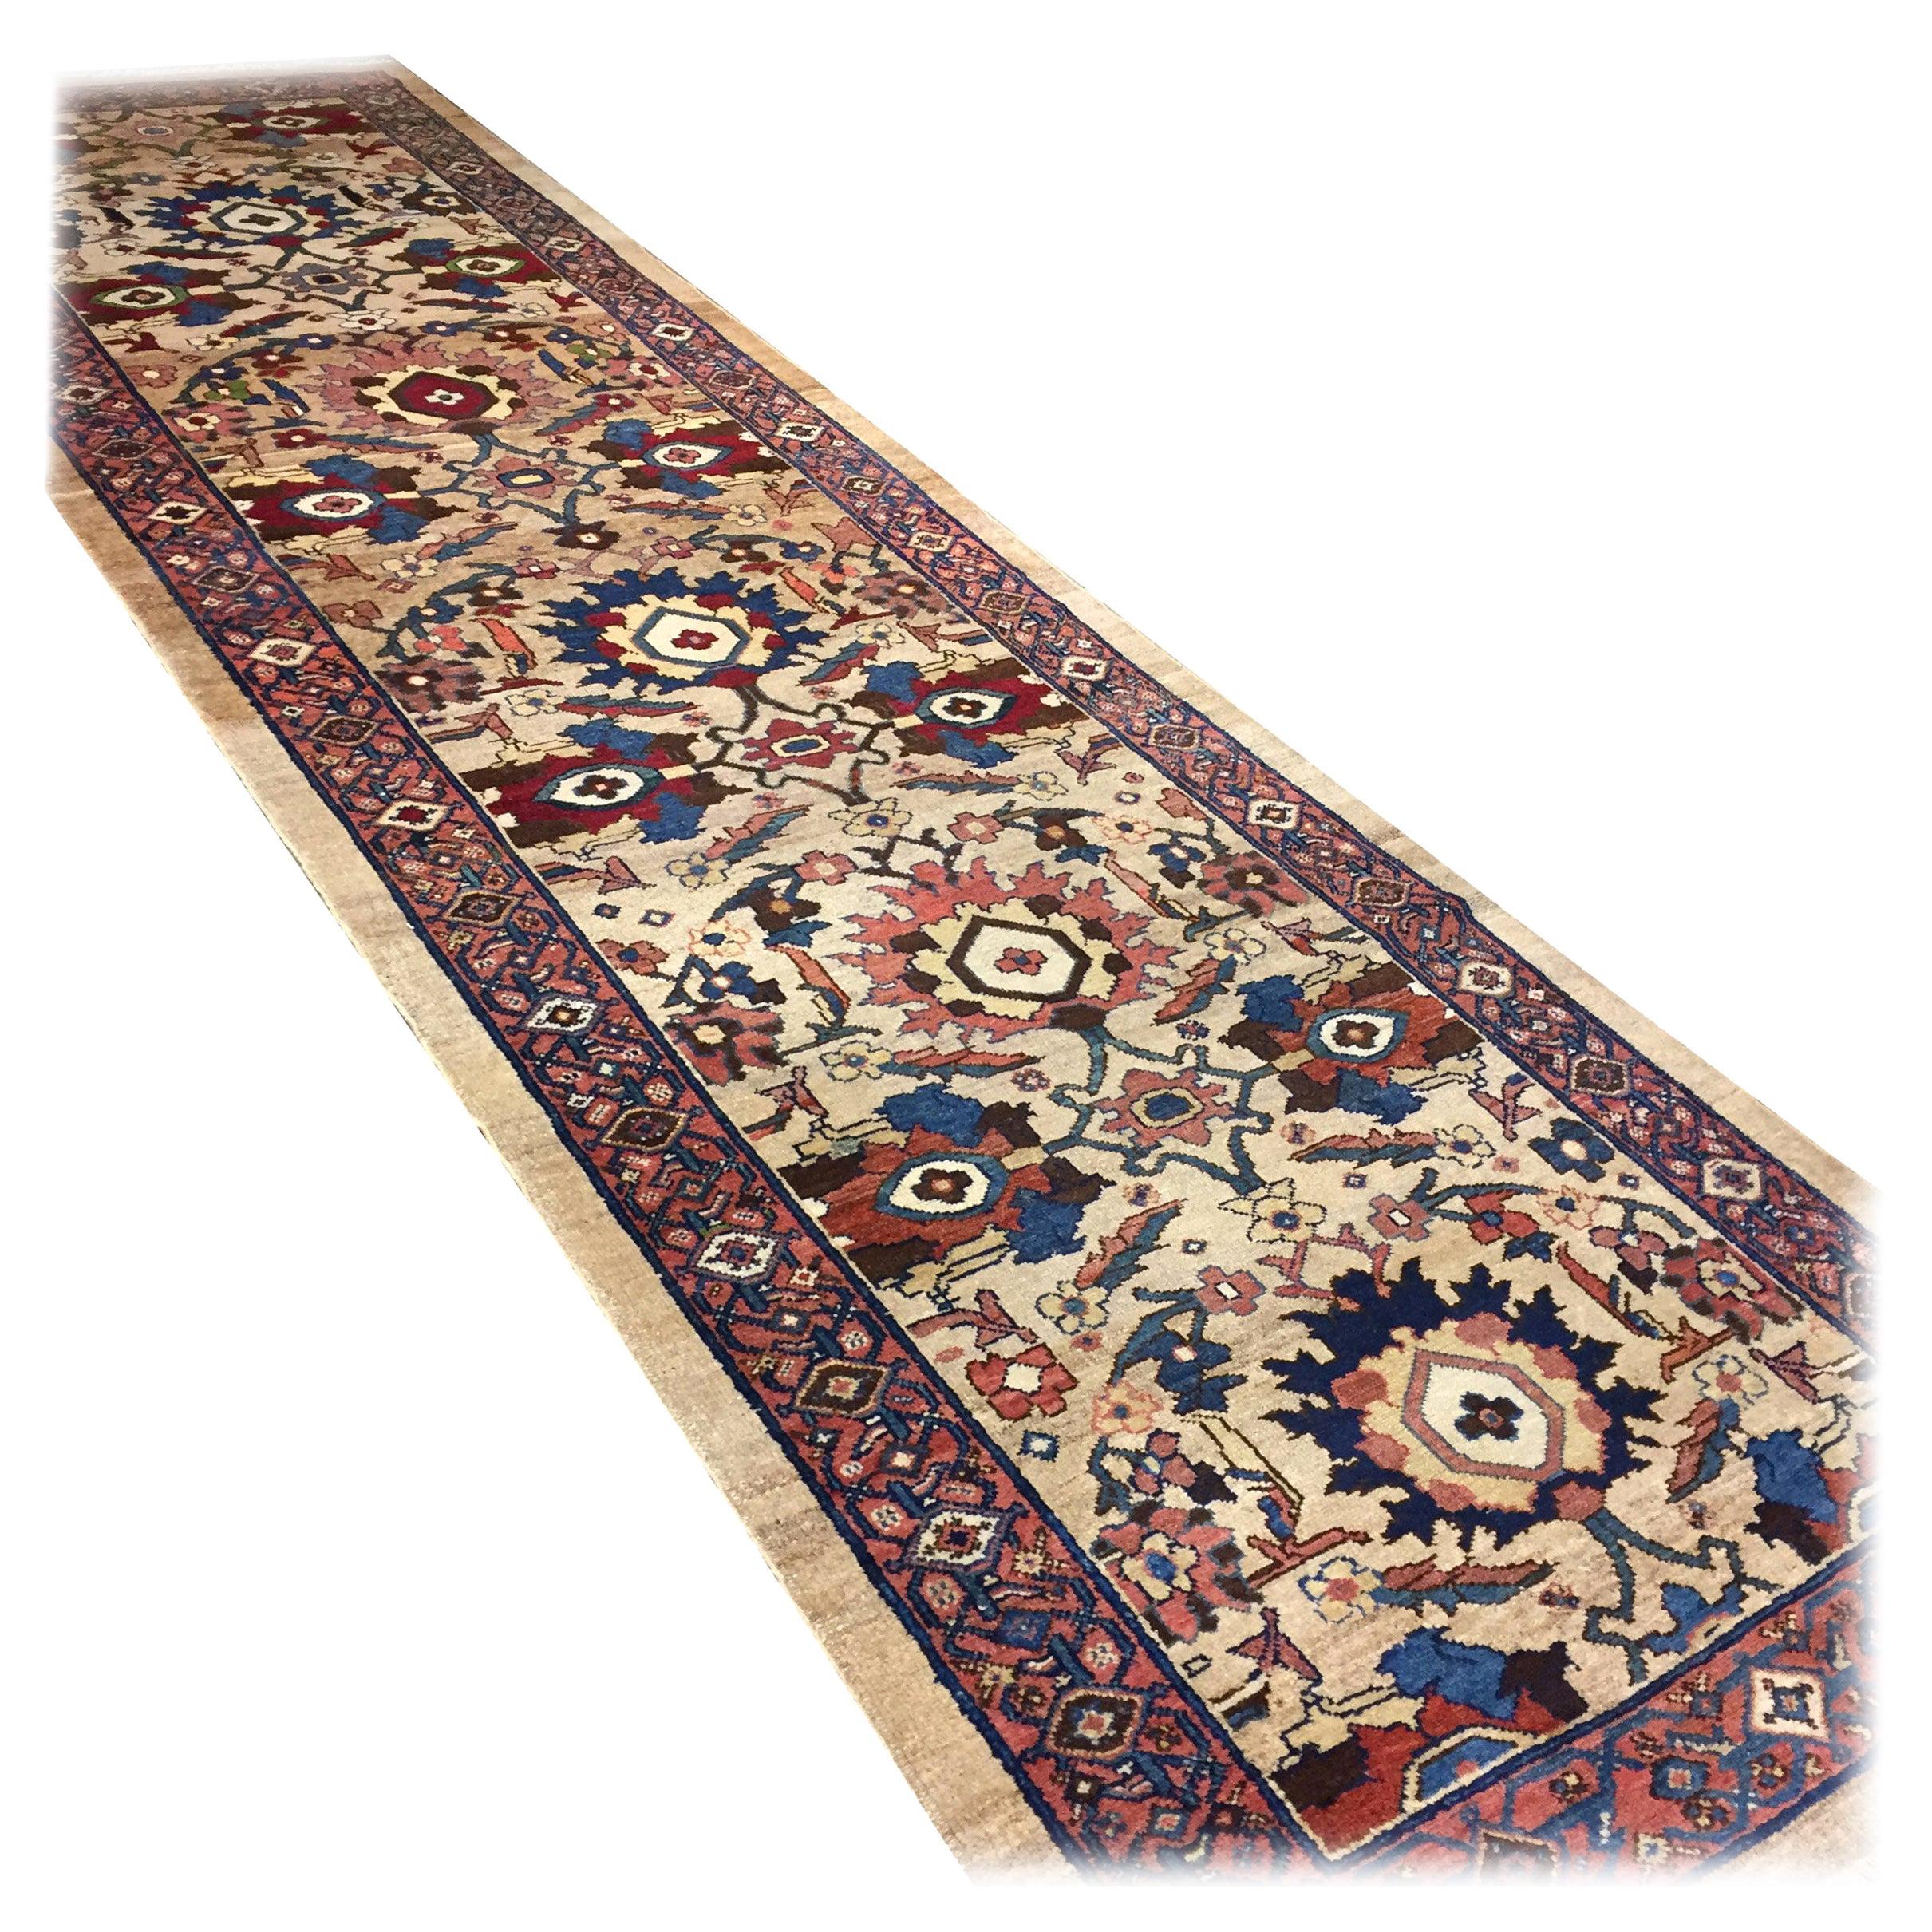 Antique Persian Serab runner rug, circa 1900 3'1 x 12'4. A truly beautiful Serab runner so bright and colorful will transform any area it is placed in. Serab is located on the edge of the Heriz weaving area and specializes in runners. Camel borders